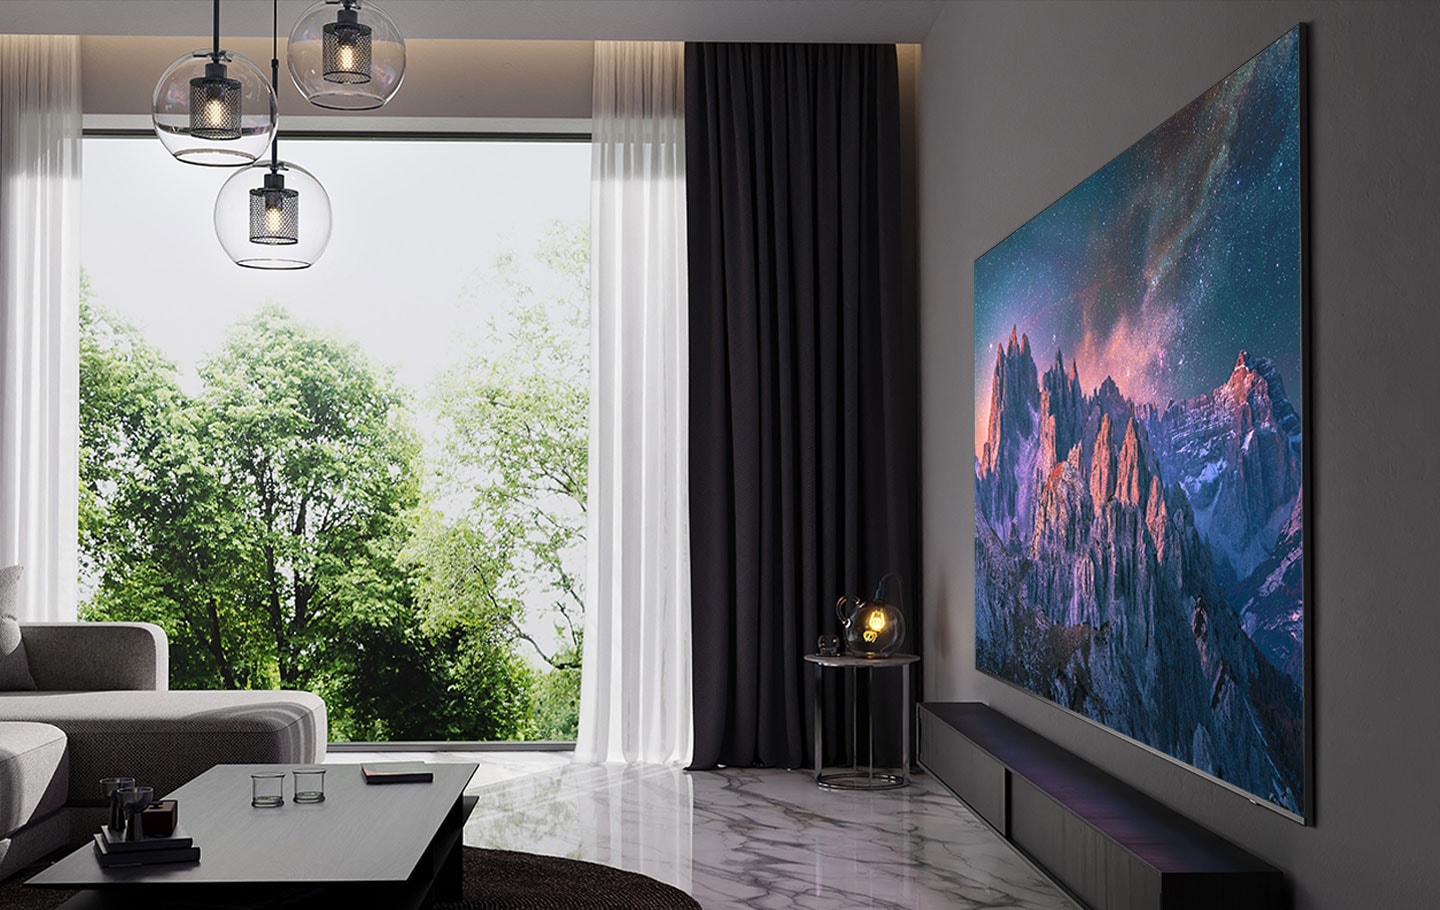 In a modern-style living room, a super slim TV displaying mountains under a starry sky mounts seamlessly onto the wall. A line traces its right profile, emphasizing the sleek design. The super slim TV integrates elegantly with the room.